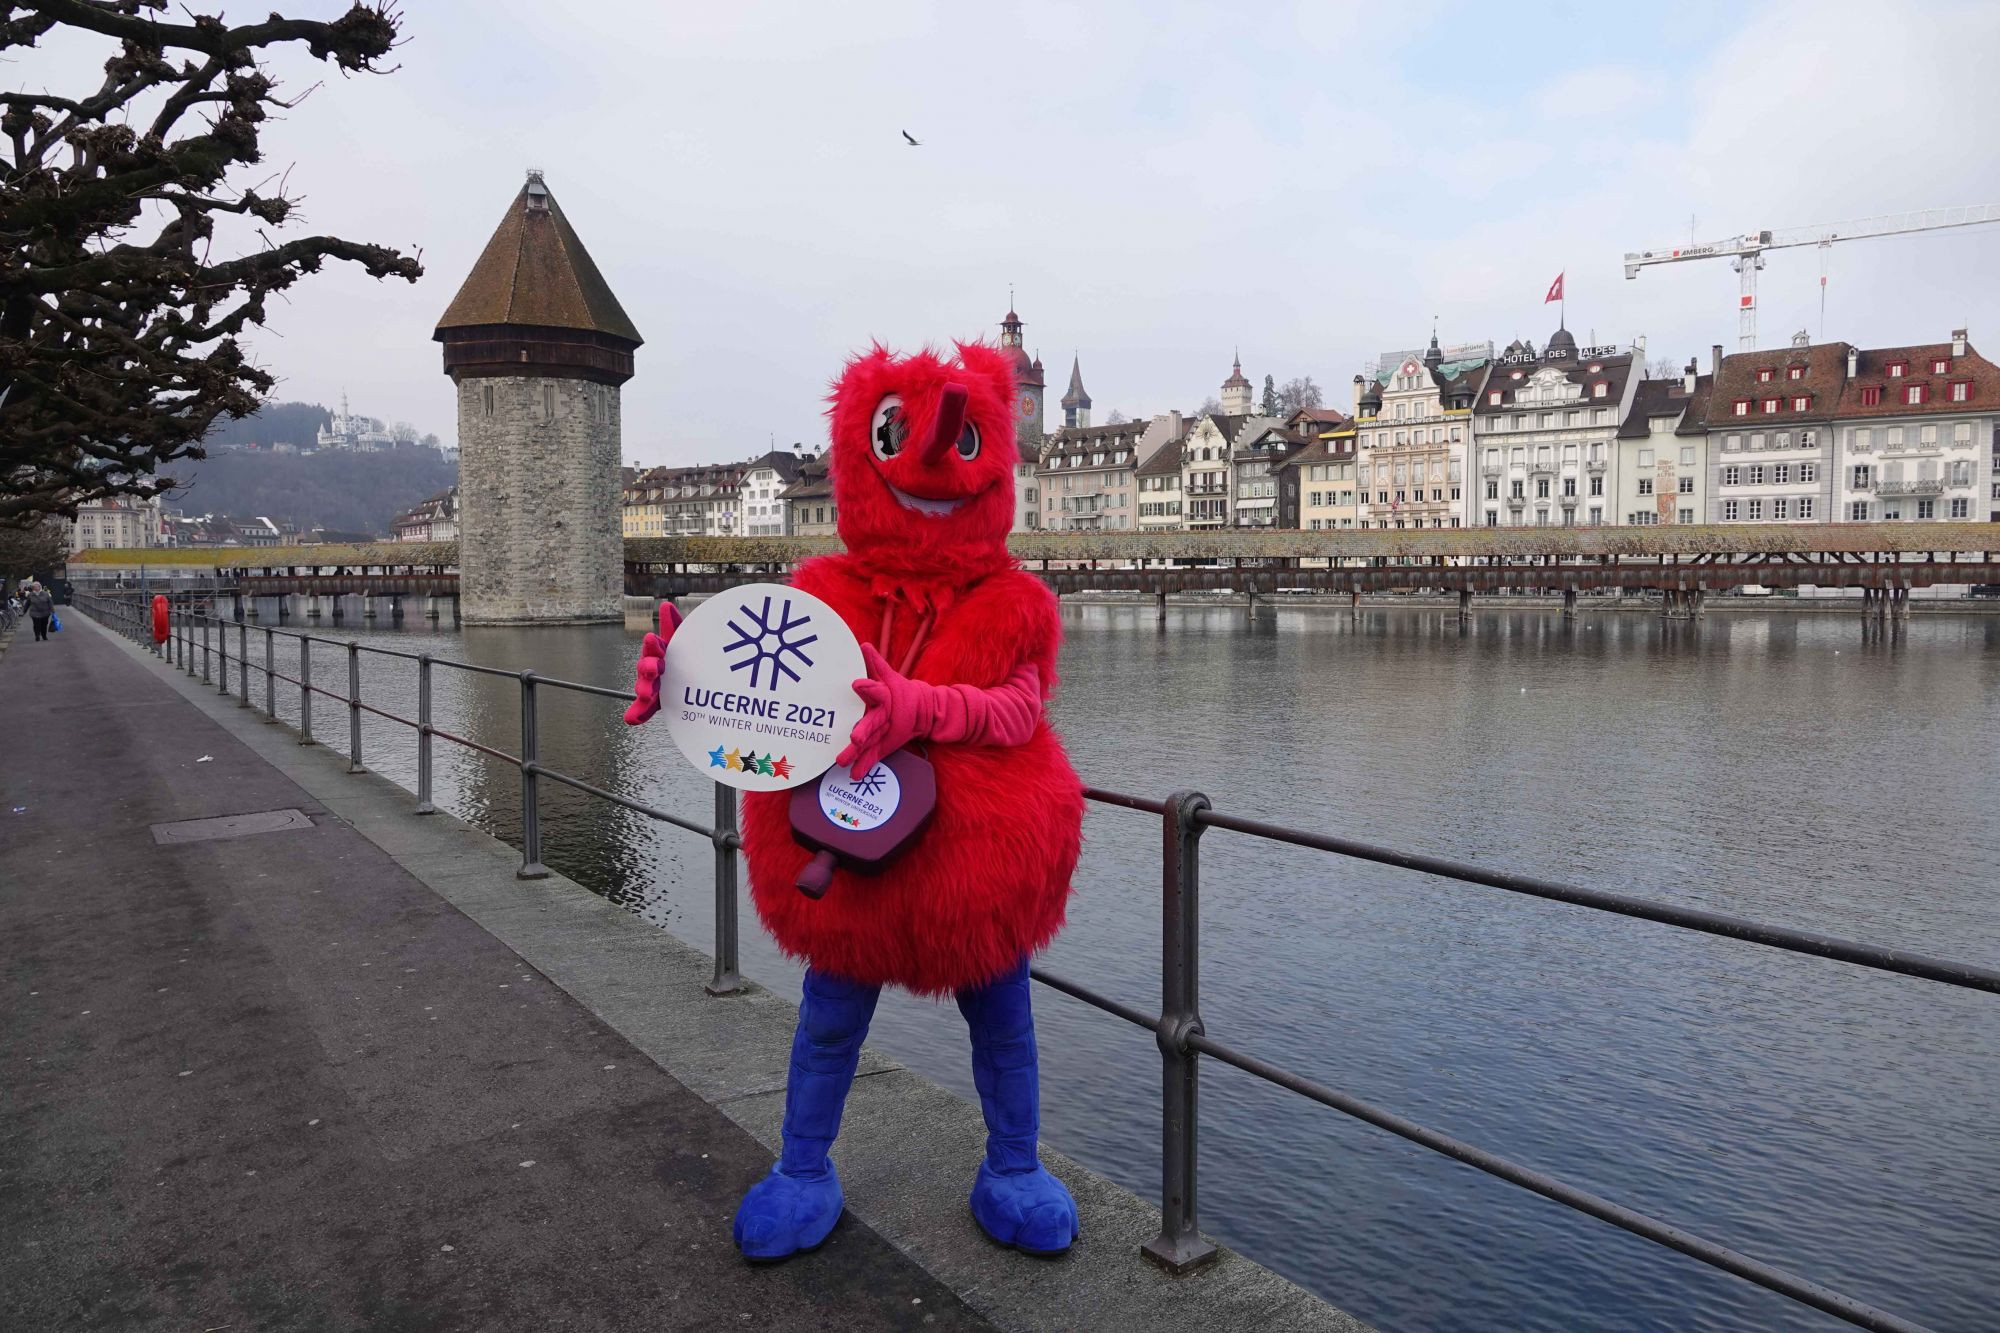 Lucerne 2021 reveal mythical creature as mascot